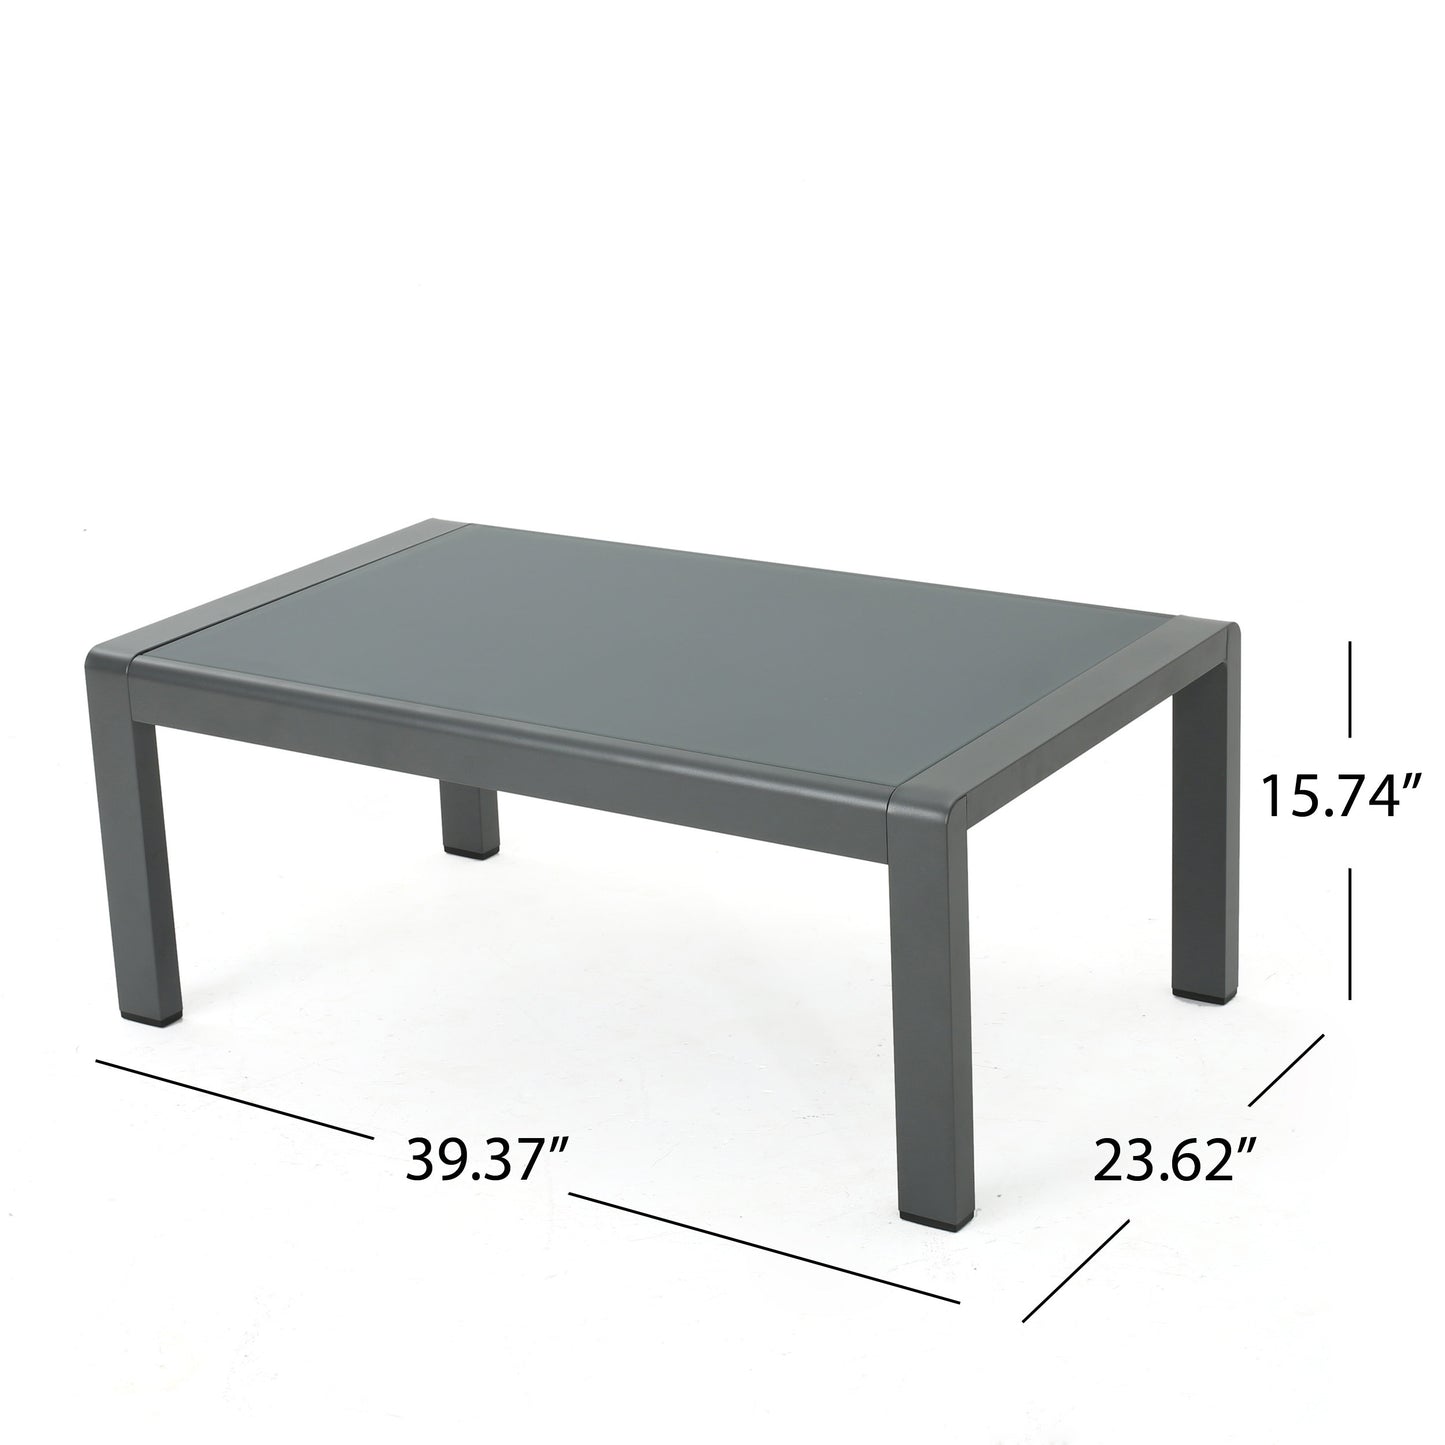 Crested Bay Outdoor Gray Aluminum Coffee Table with Tempered Glass Table Top